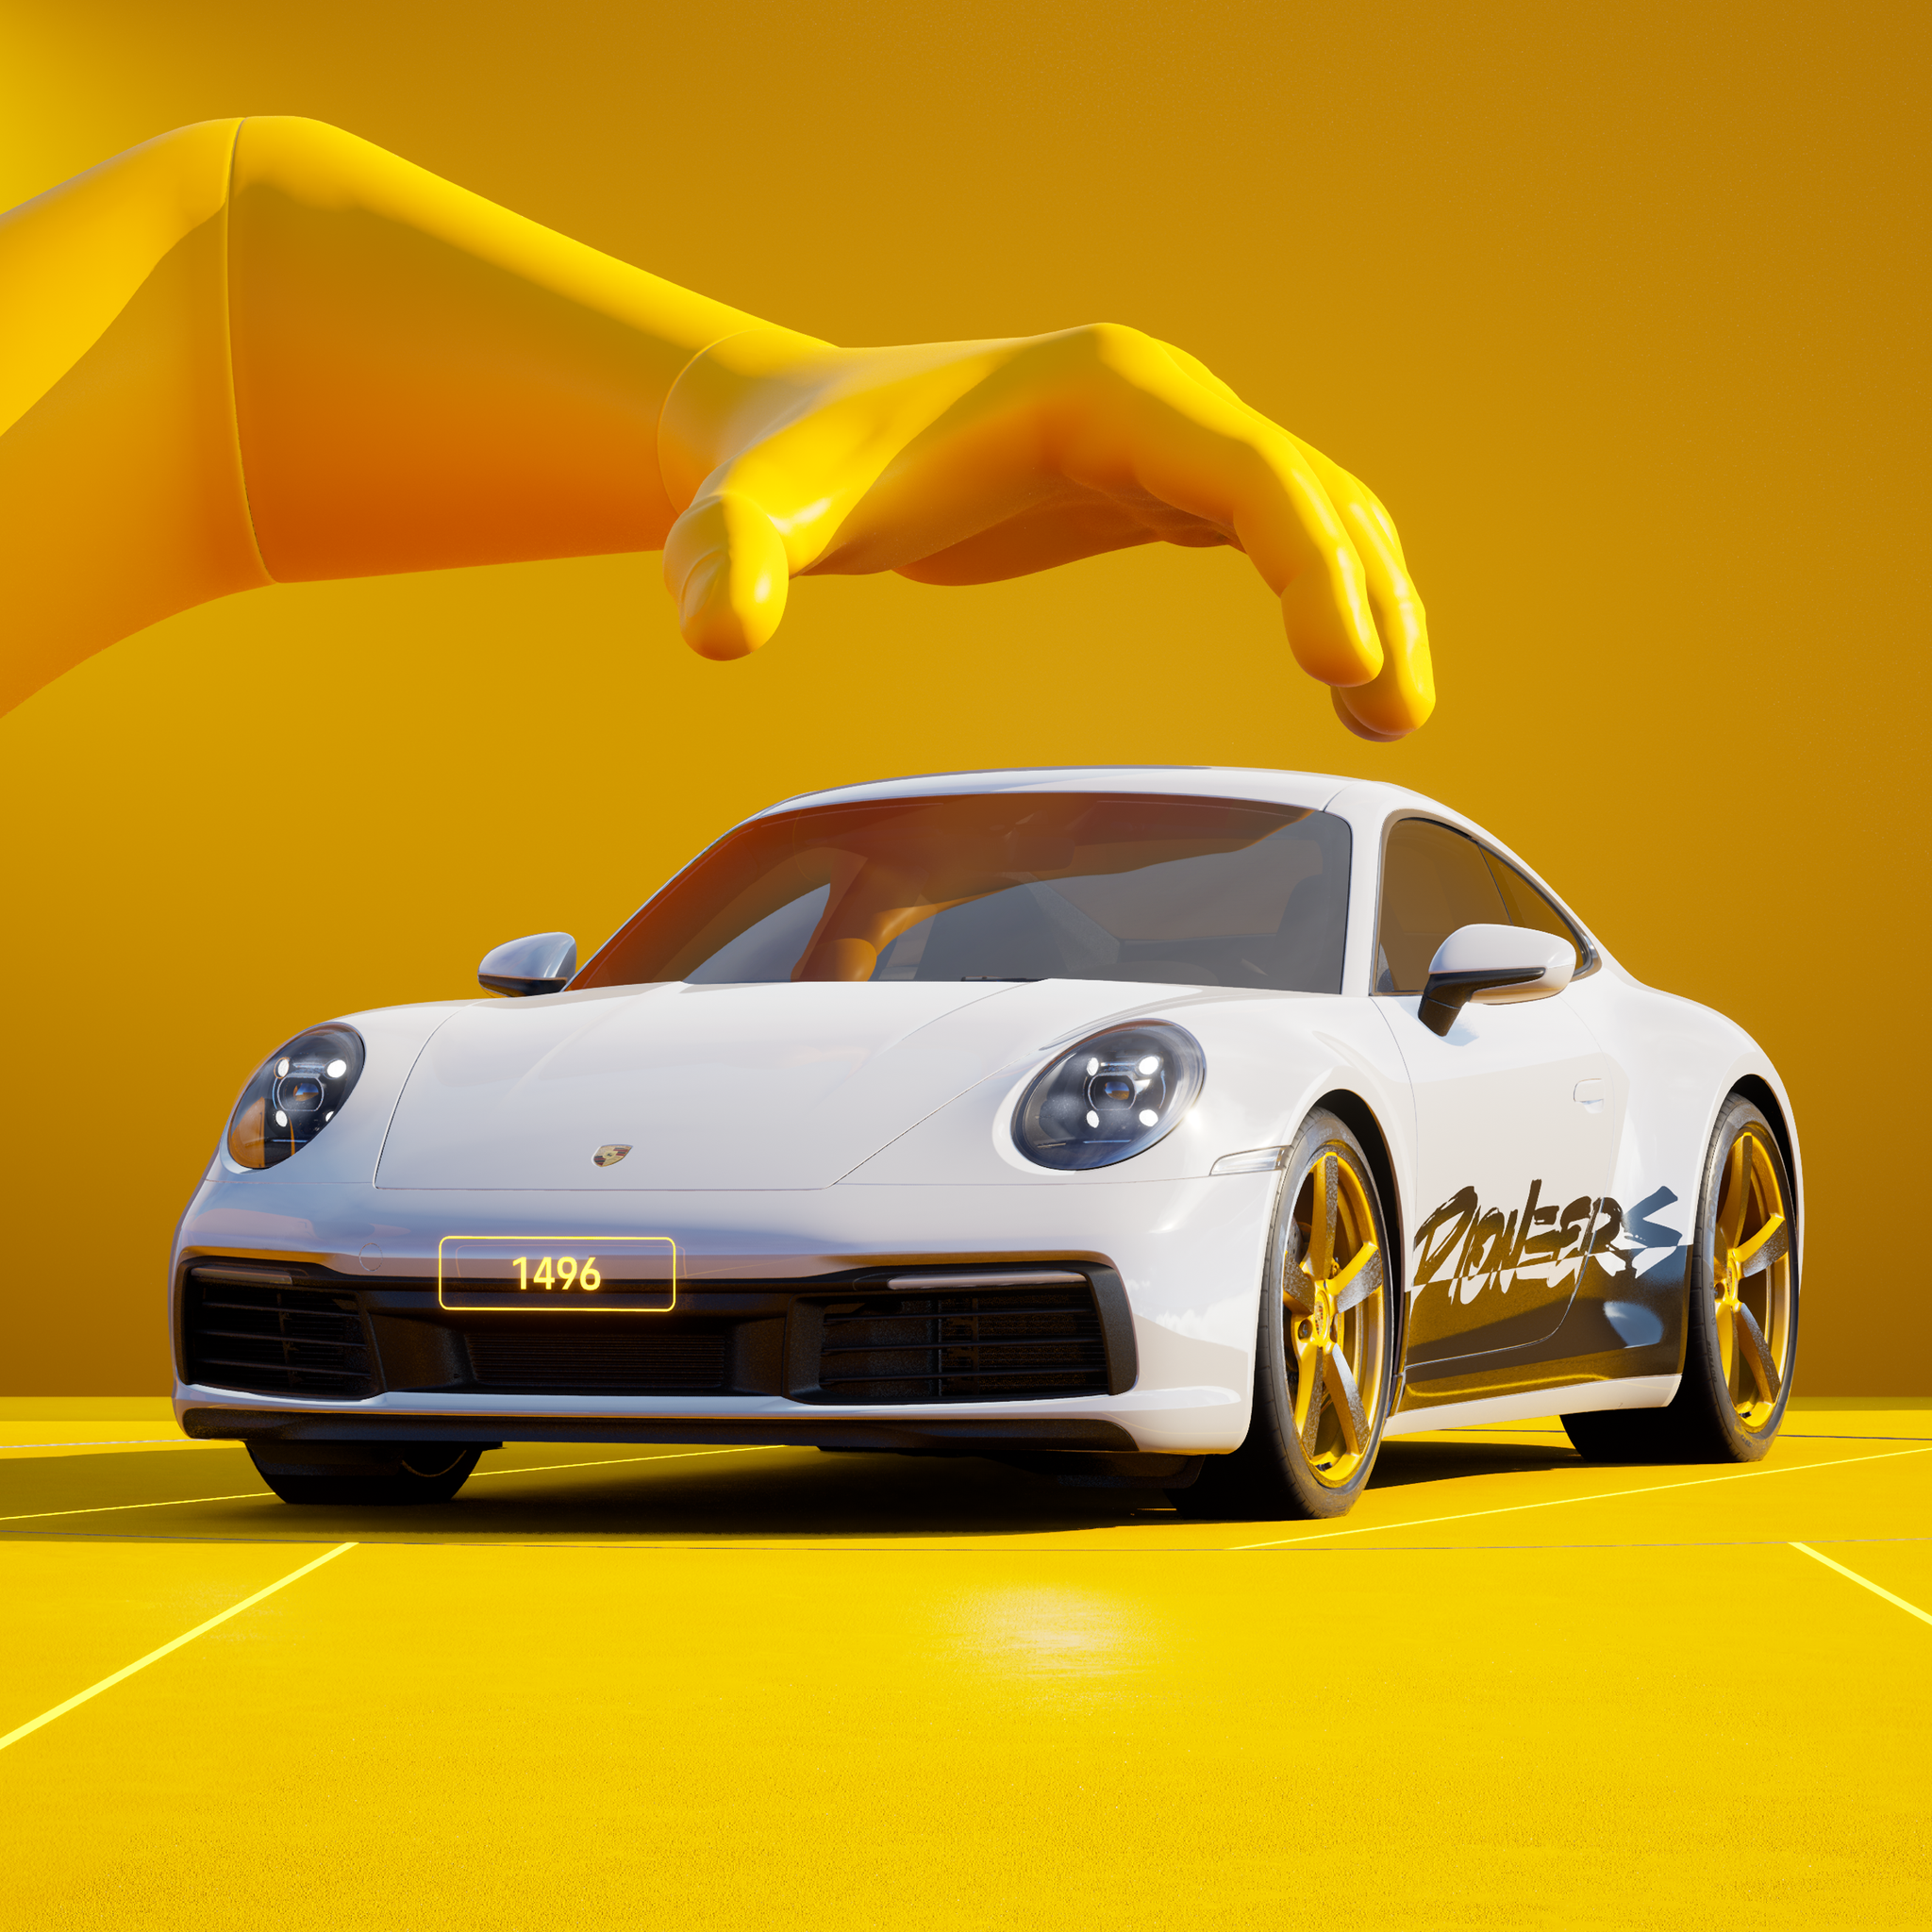 The PORSCHΞ 911 1496 image in phase